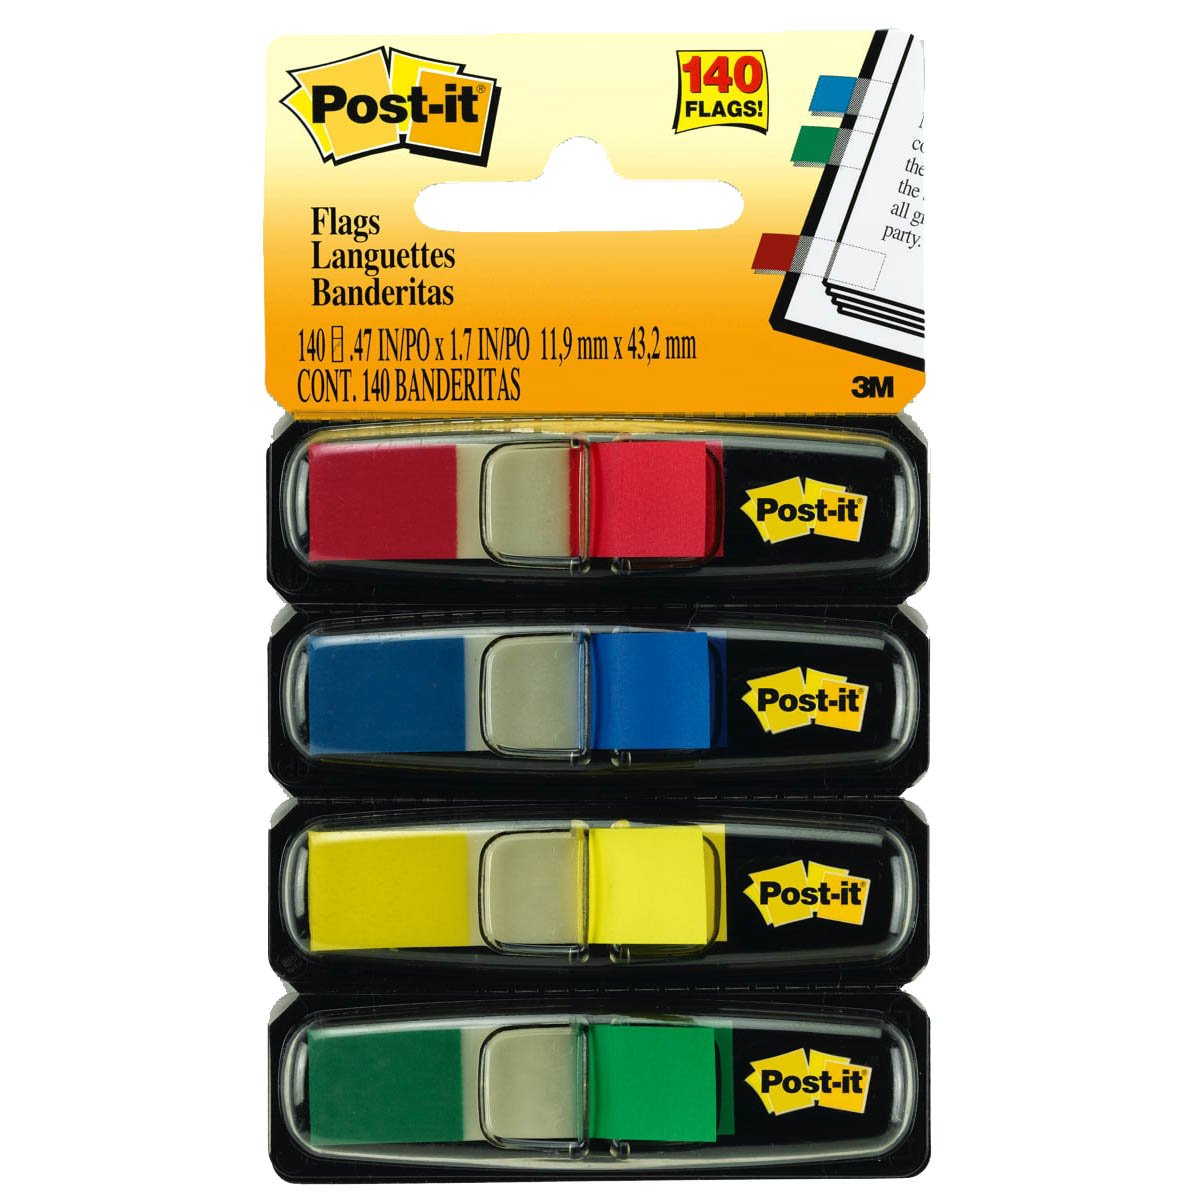 3M Post-it Small Flags 0.47in X 1.7in, 4 Colours, 35 Sheets